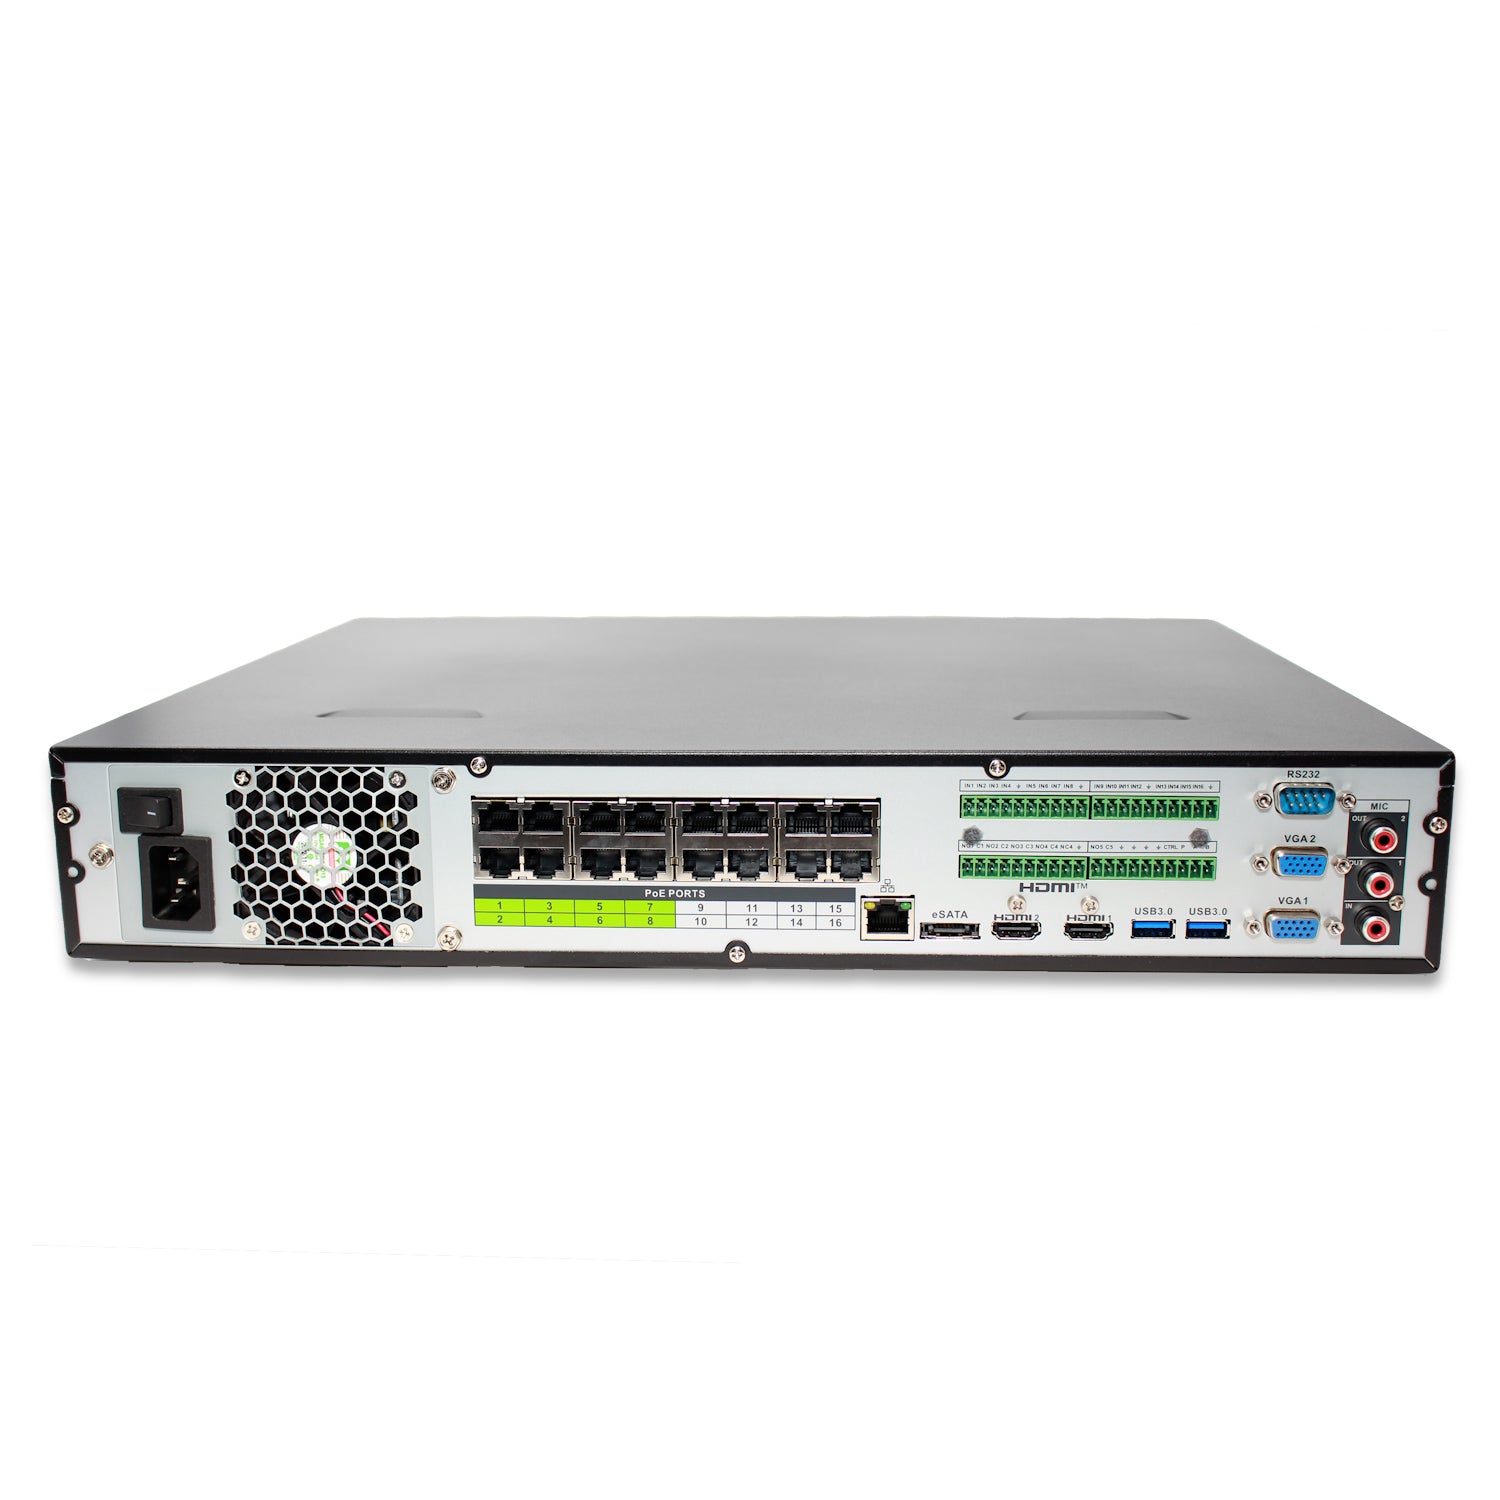 MNR5432-16P-AI | 32 Channel 4K H.265+ Pro-AI NVR with 80TB (4x20TB) HDD Max Internal Capacity, eSATA Expandable - HDDs Not Included - Montavue